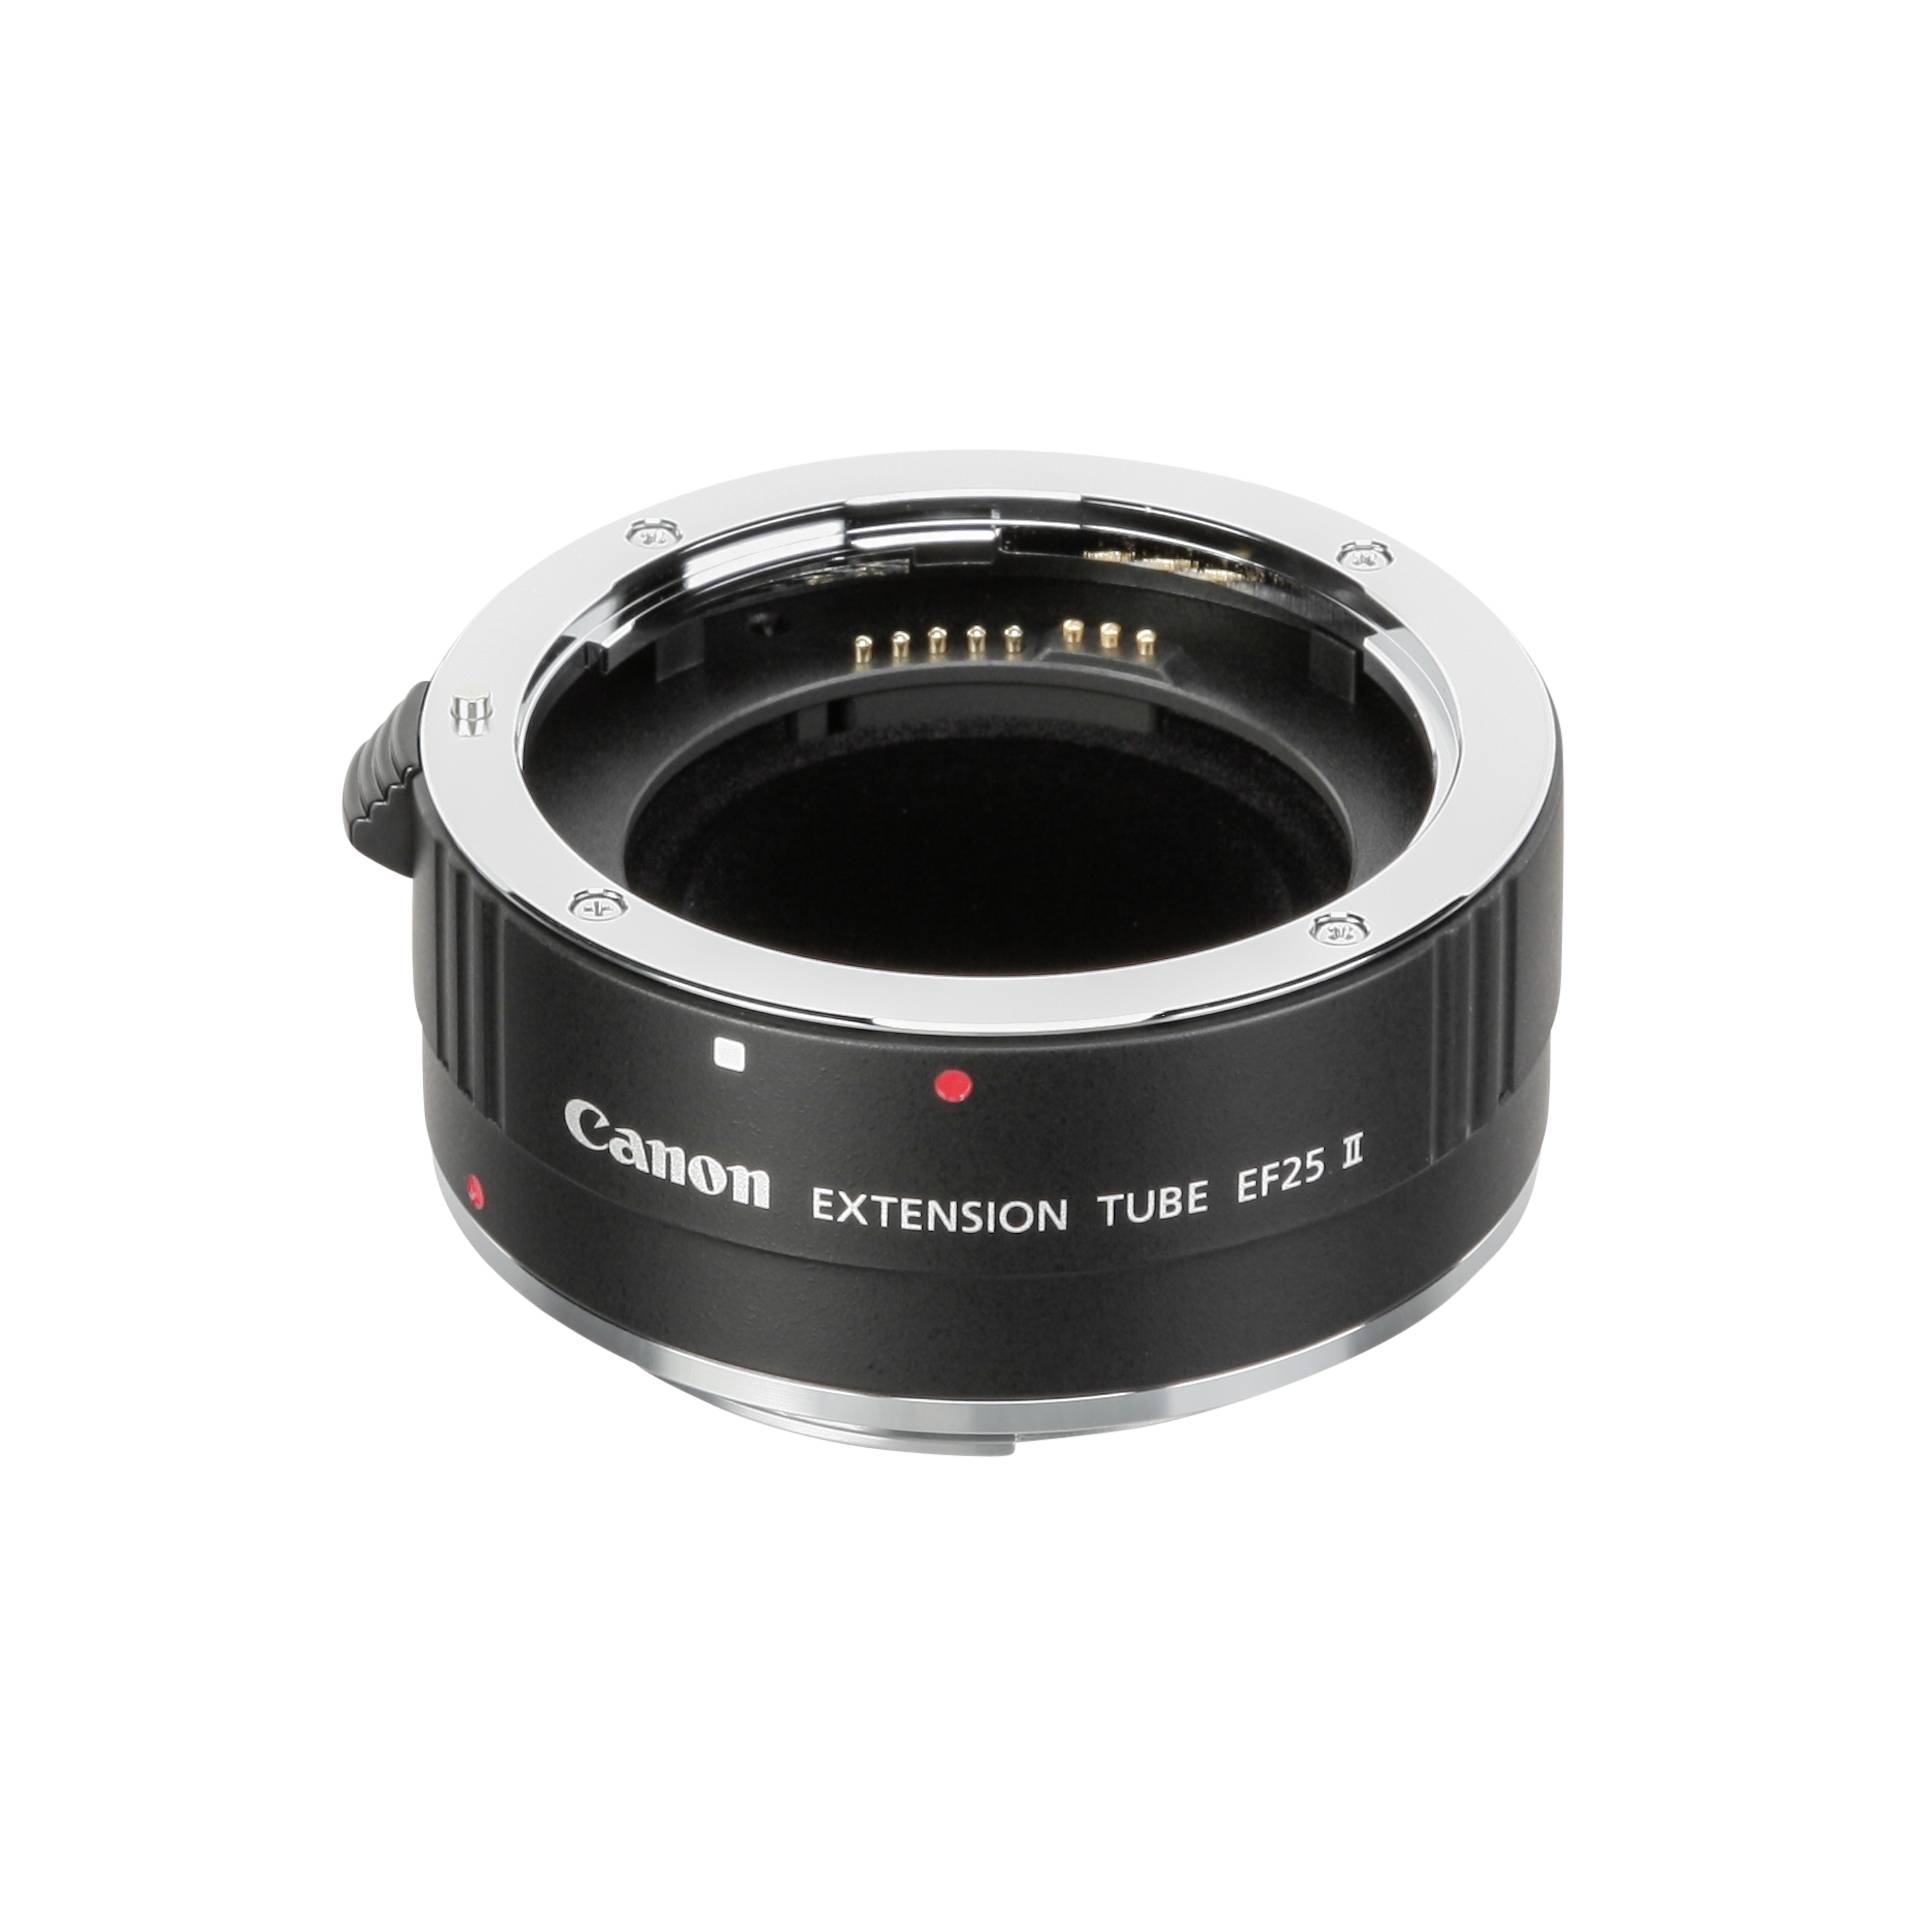 Canon extension tube EF 25 II